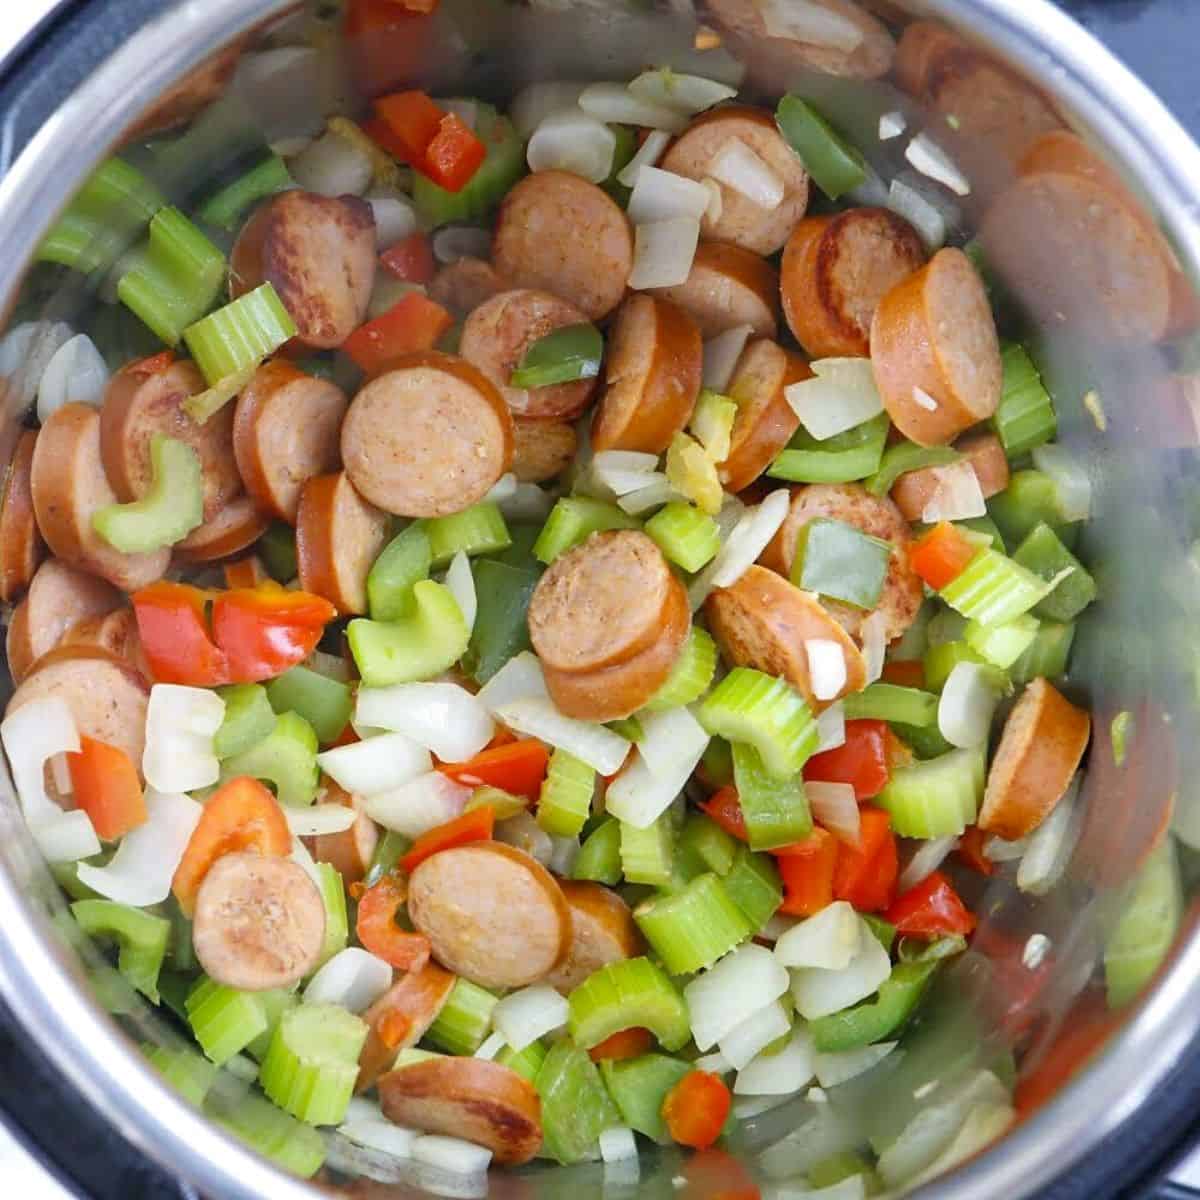 Celery, onions, celery, and sausage browning in a dutch oven to make jambalaya